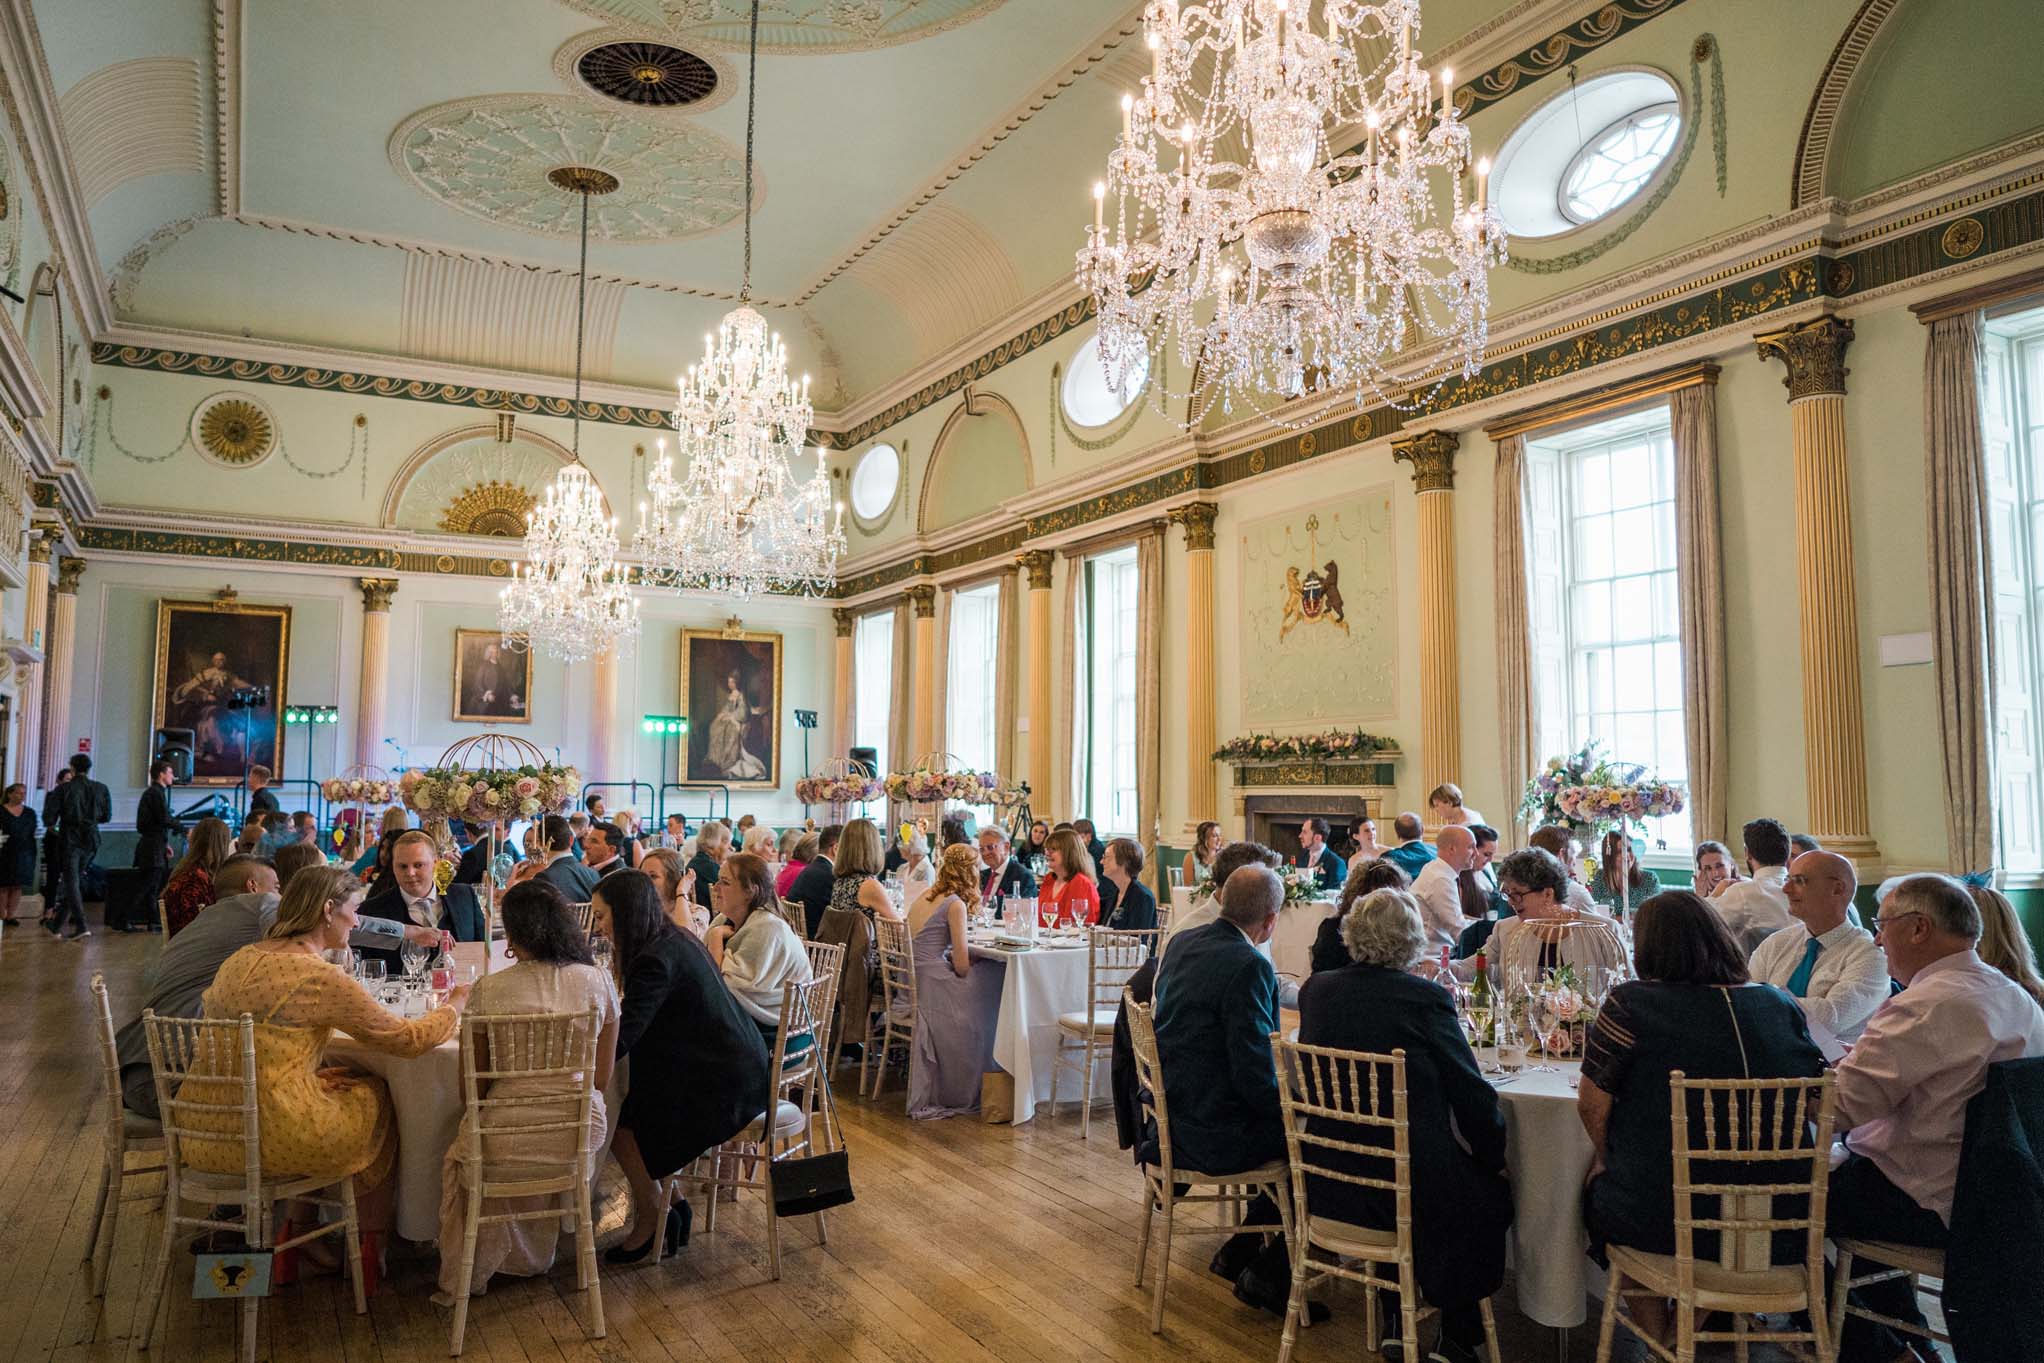 Guests seated at a wedding reception in the Banqueting Room